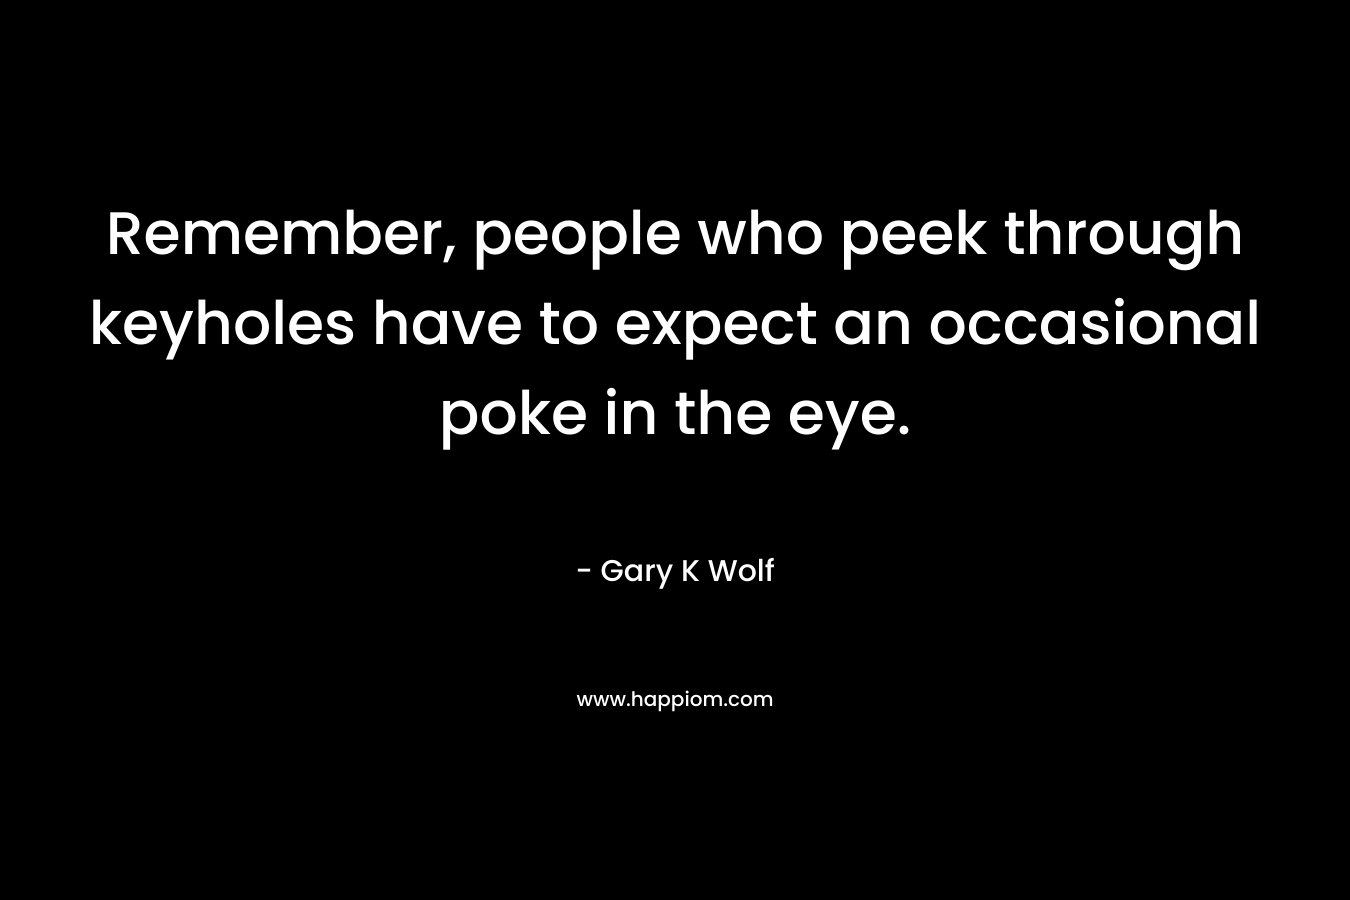 Remember, people who peek through keyholes have to expect an occasional poke in the eye. – Gary K Wolf